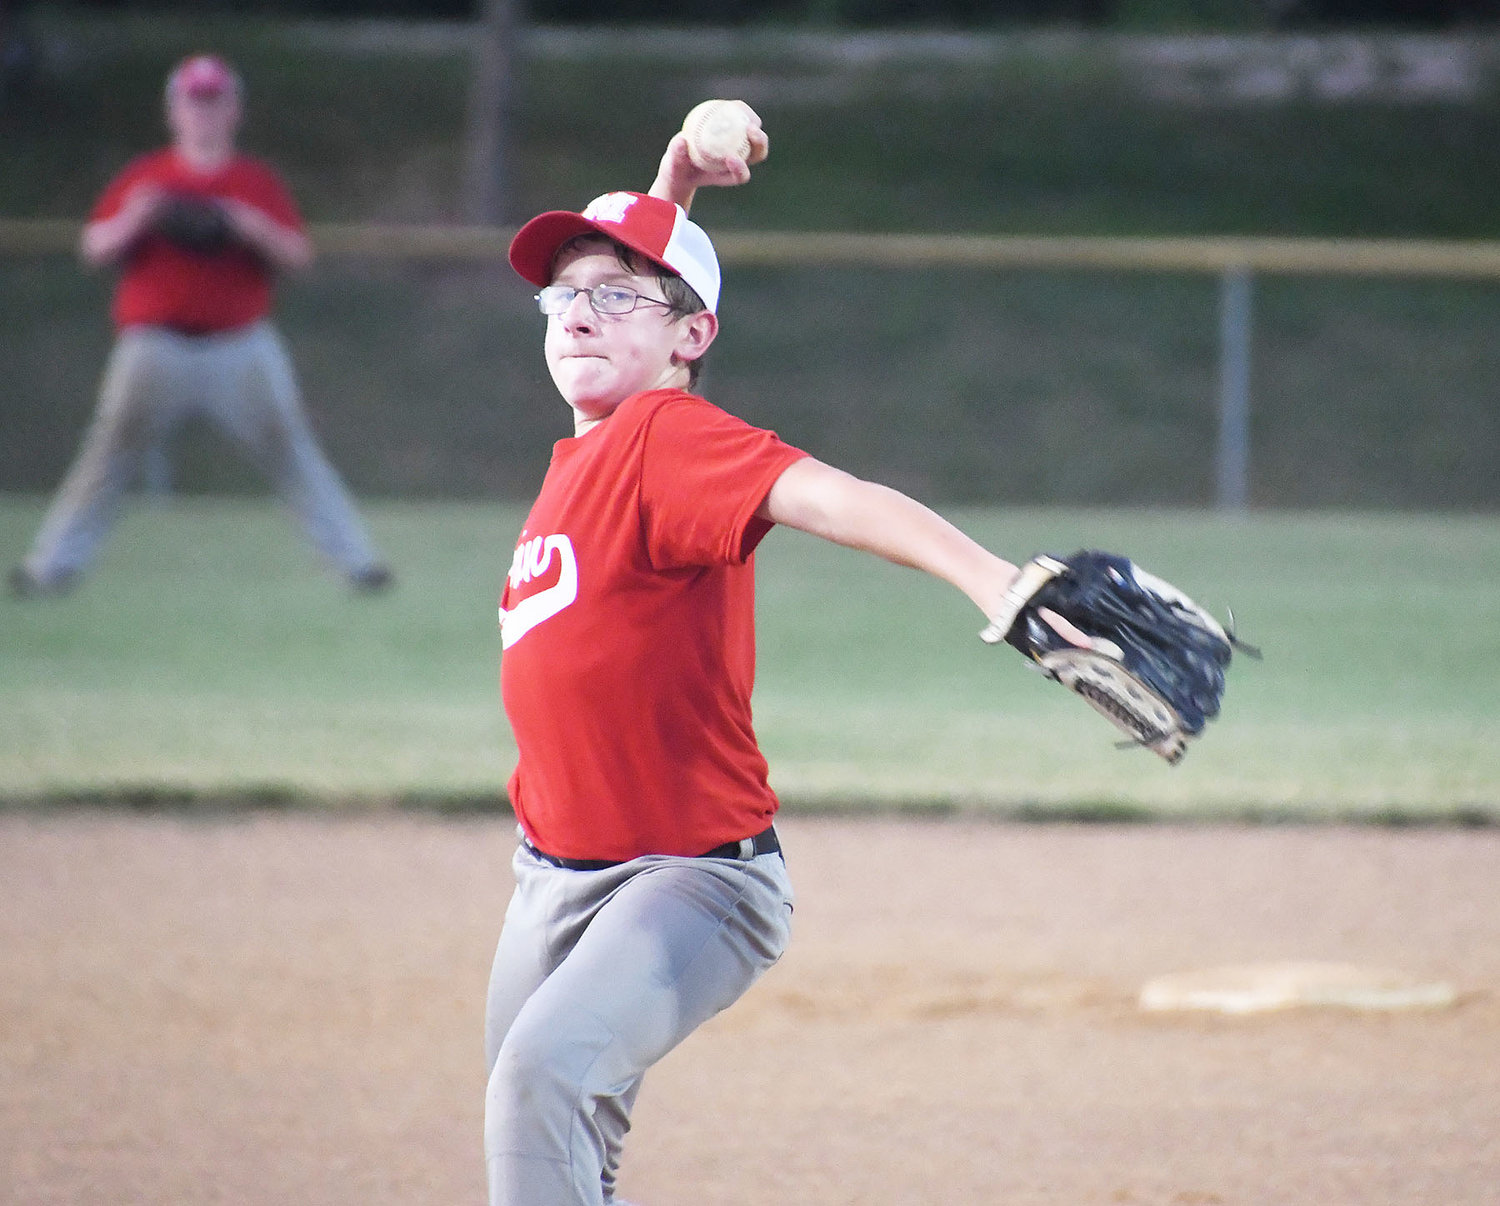 Spartan Heat pitcher Izik Burton deals toward home plate during the game versus the Bombers on Monday, July 11.